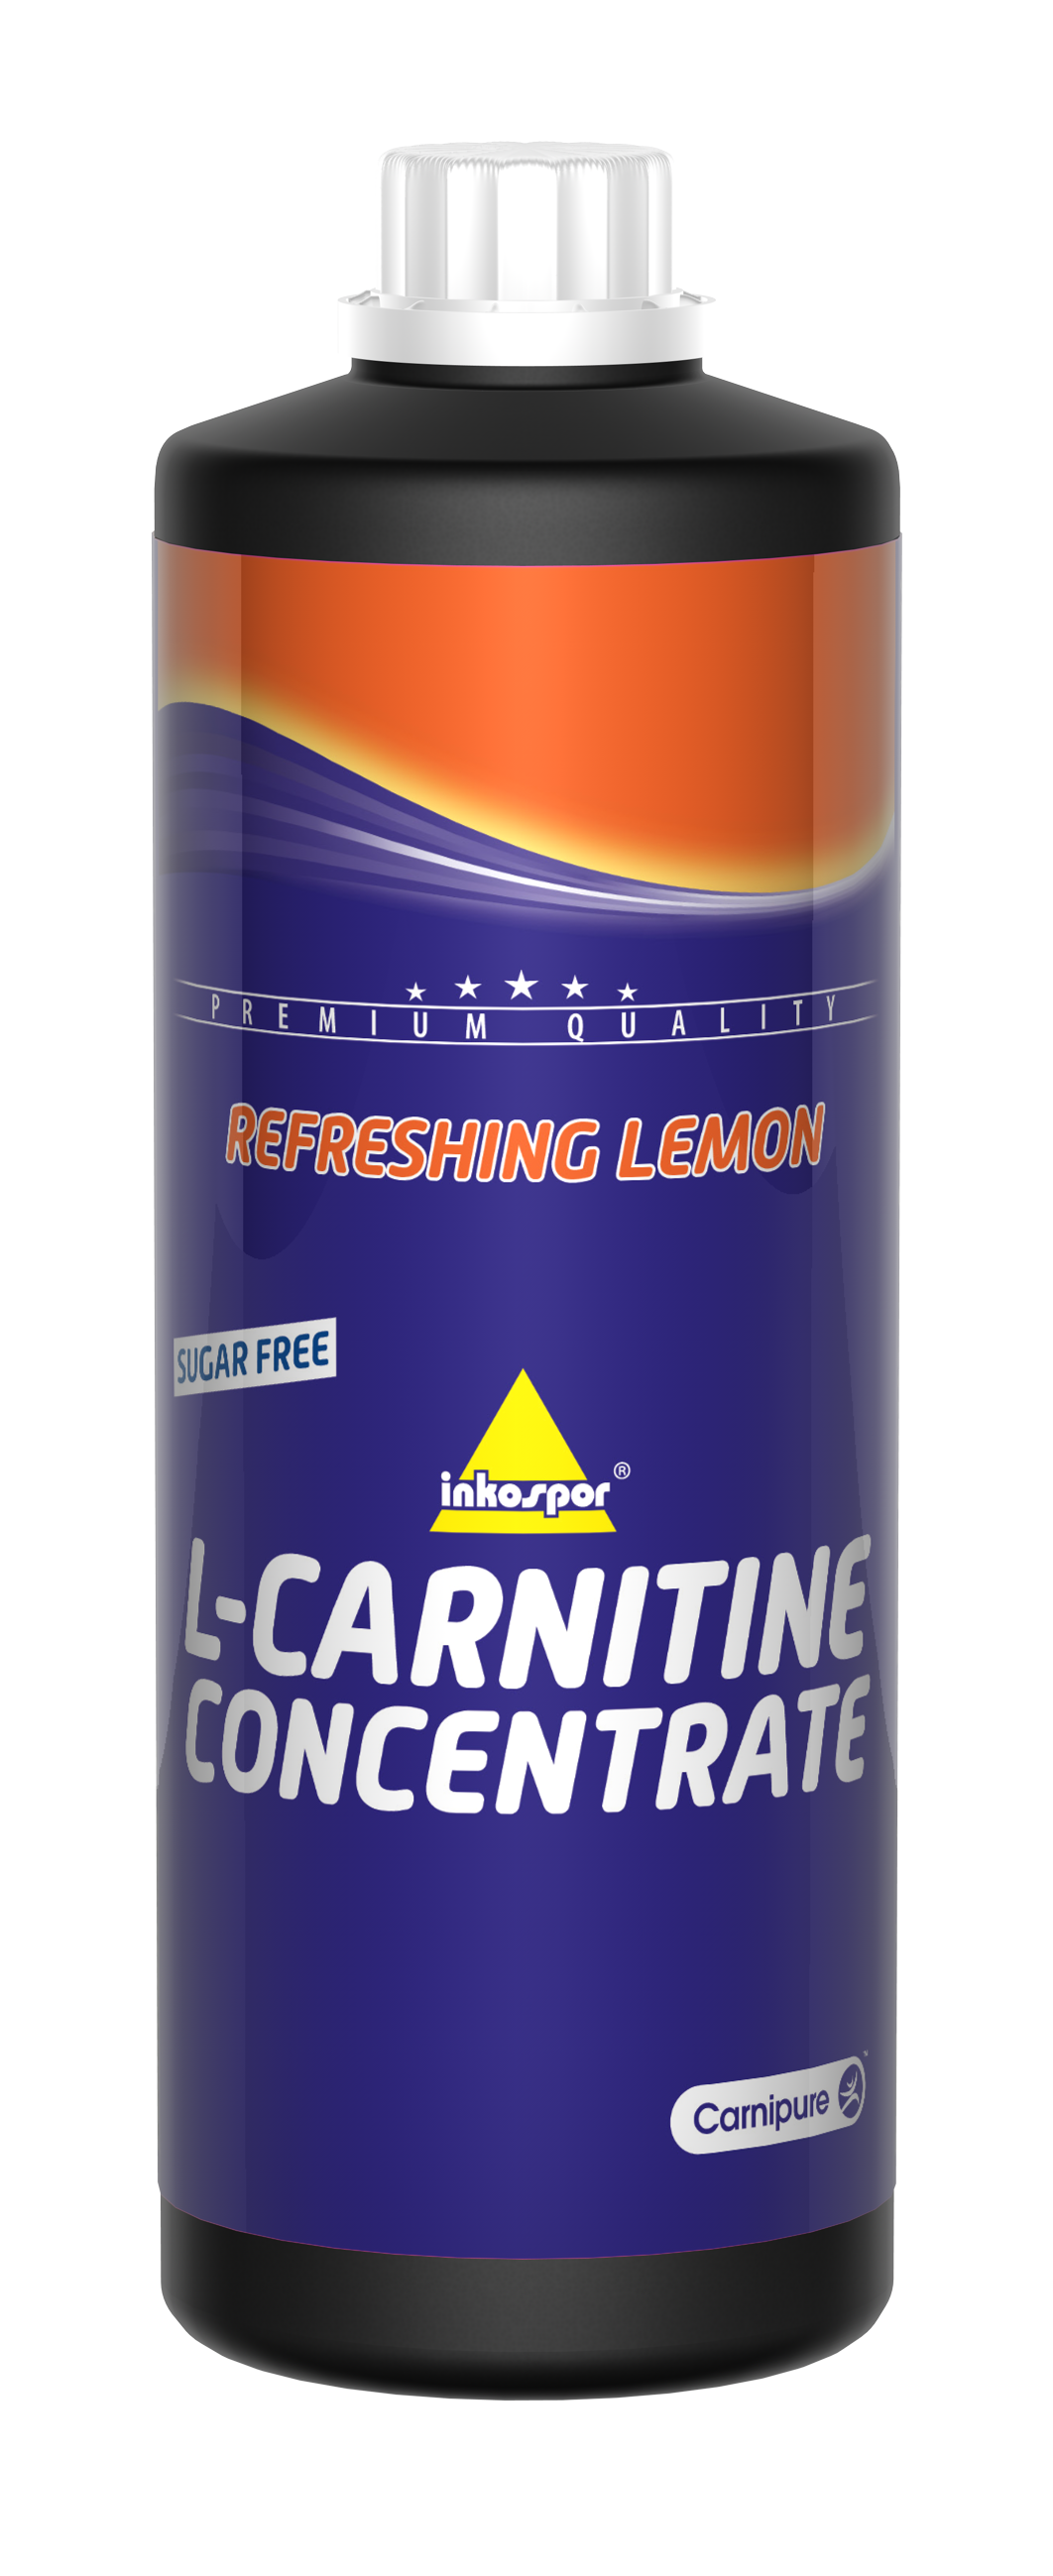 LCarnitinConcentrate